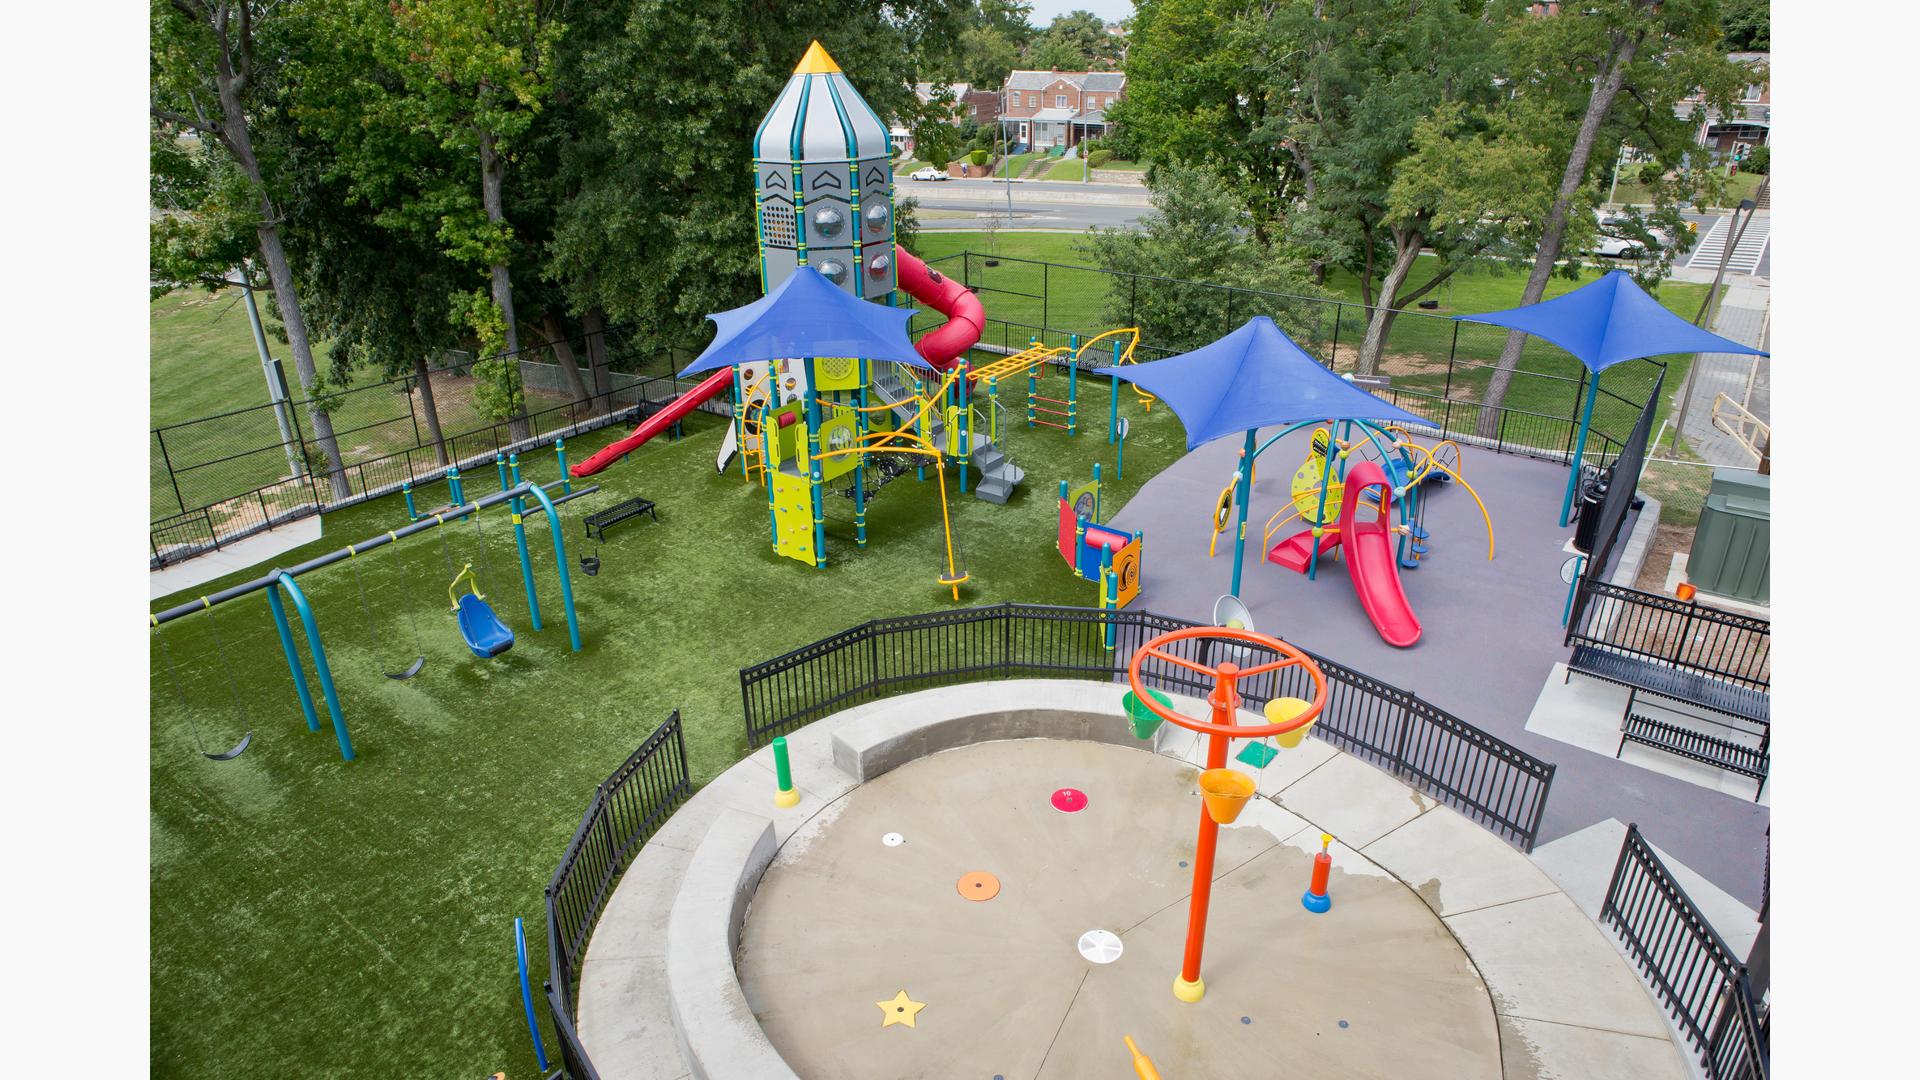 Aerial view of a park playground with a spaceship themed play tower.